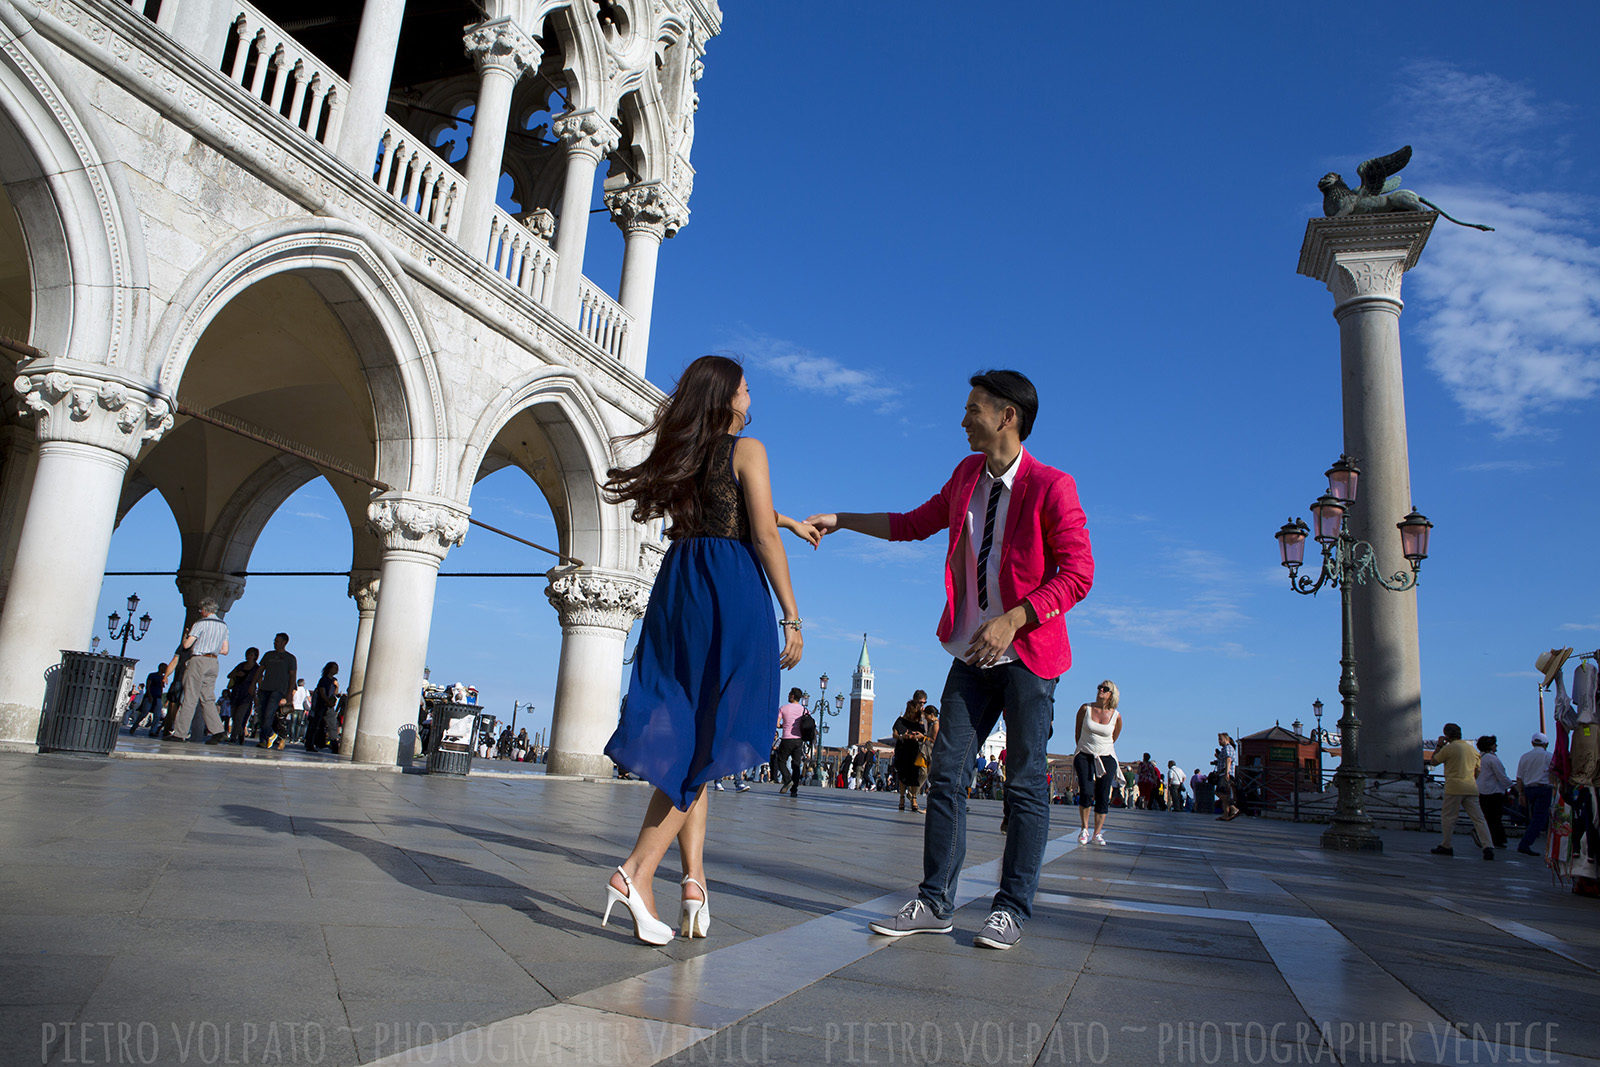 Venice photographer for portrait vacation photography session ~ Couple photographer in Venice ~ Romantic and fun photo walk